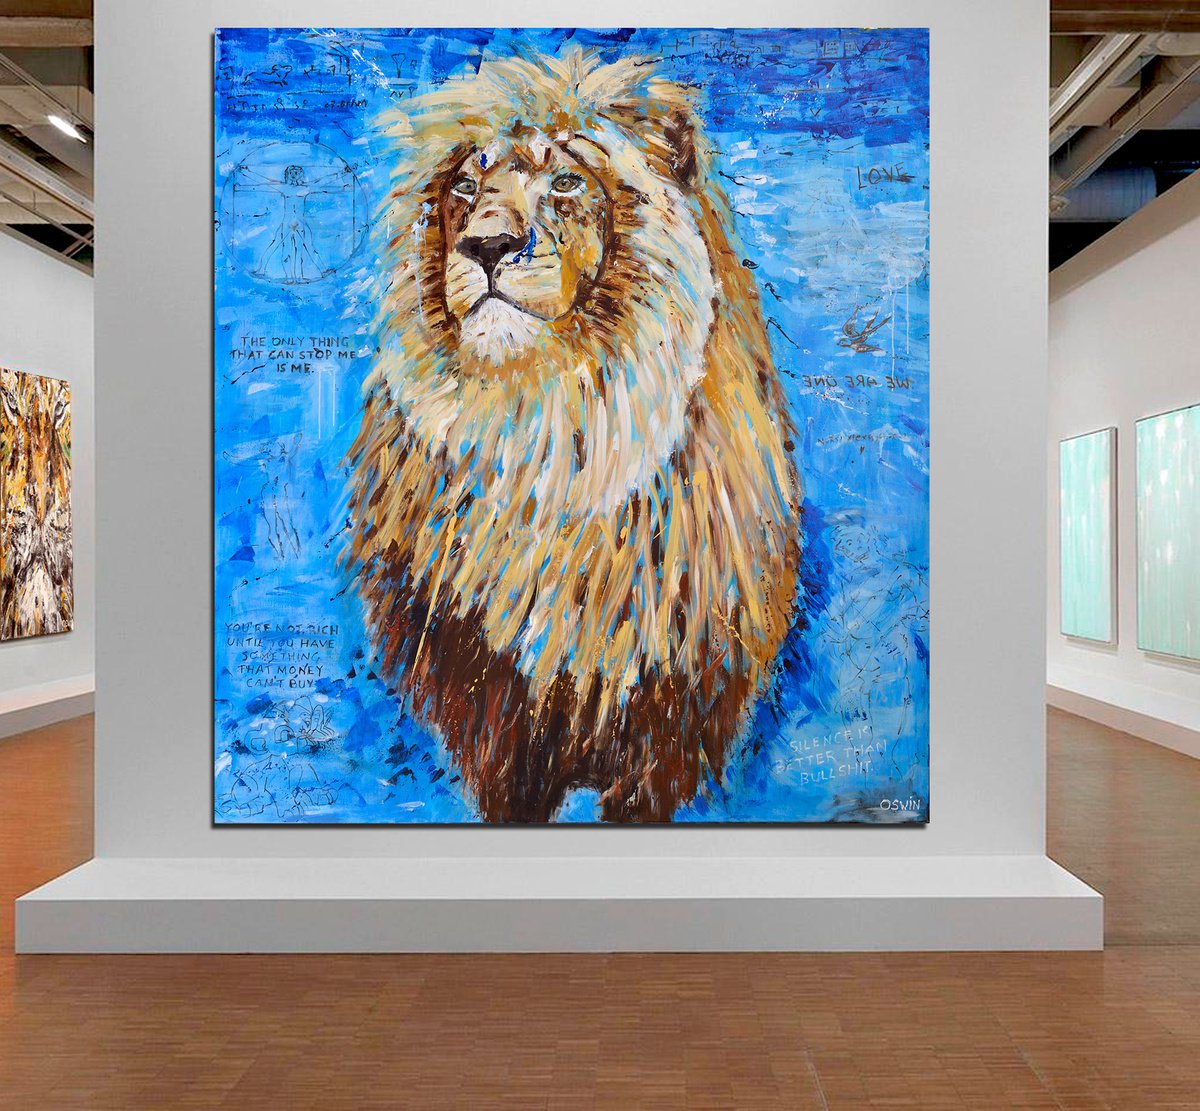 LION KING painting- 200 x 180 cm| 78.74 x 70.87 Series Hidden Treasures by Oswin Gessell... by Oswin Gesselli